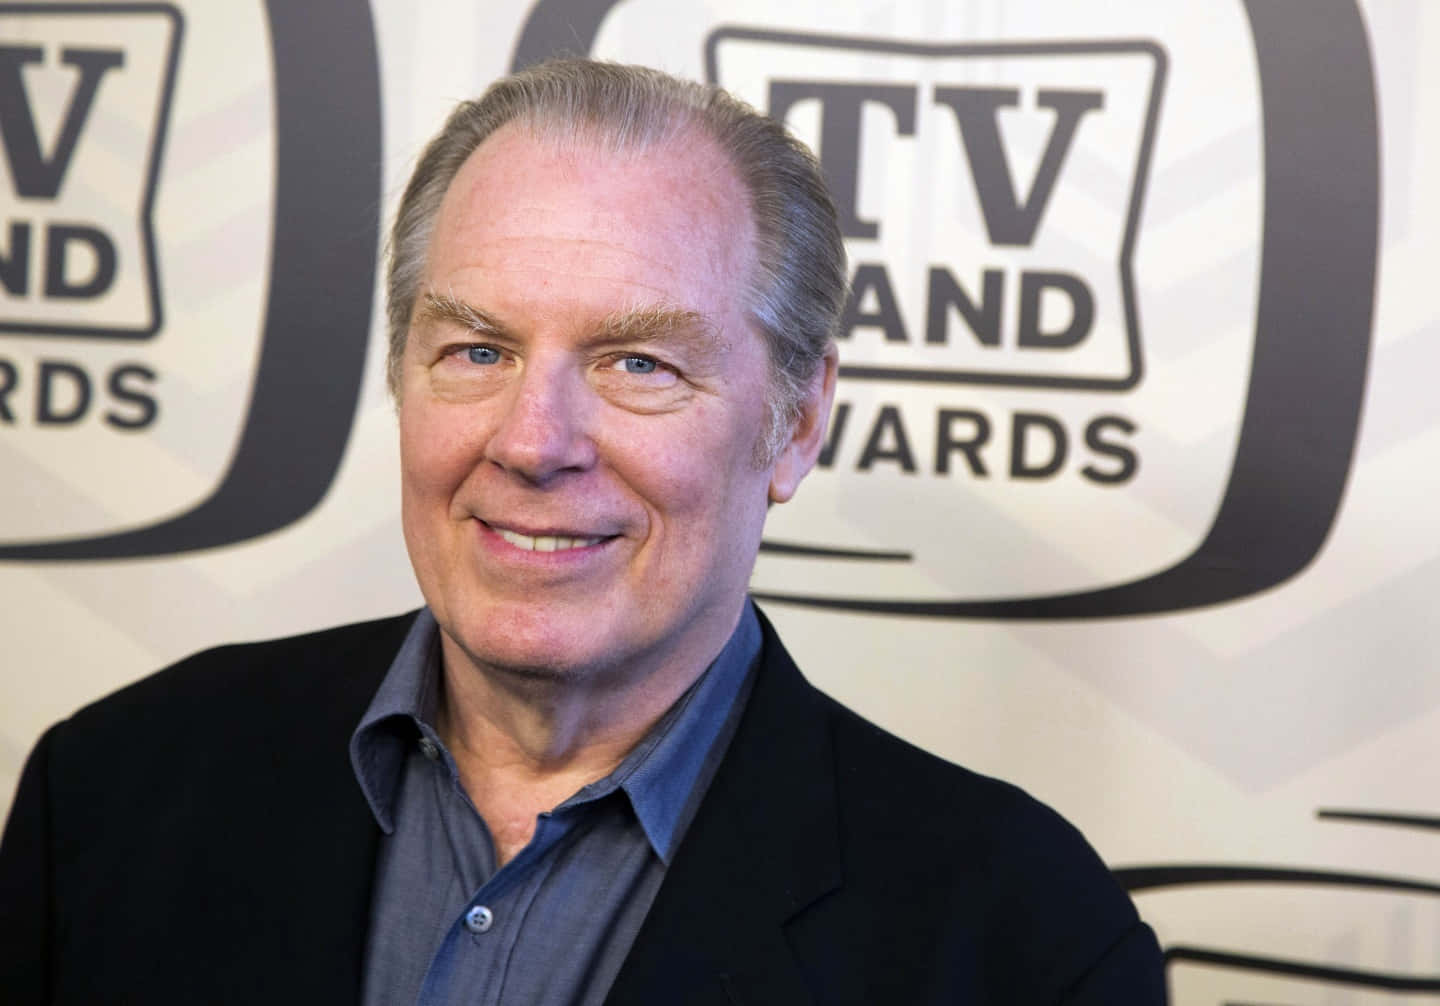 Actormichael Mckean Is Known For His Versatile Performances In Film, Television, And Theater. He Has Appeared In Numerous Iconic Roles, Such As Lenny Kosnowski In Laverne & Shirley, David St. Hubbins In This Is Spinal Tap, And Chuck Mcgill In Better Call Saul. With His Impressive Acting Skills And Engaging Presence, Michael Mckean Continues To Captivate Audiences Around The World. Fondo de pantalla